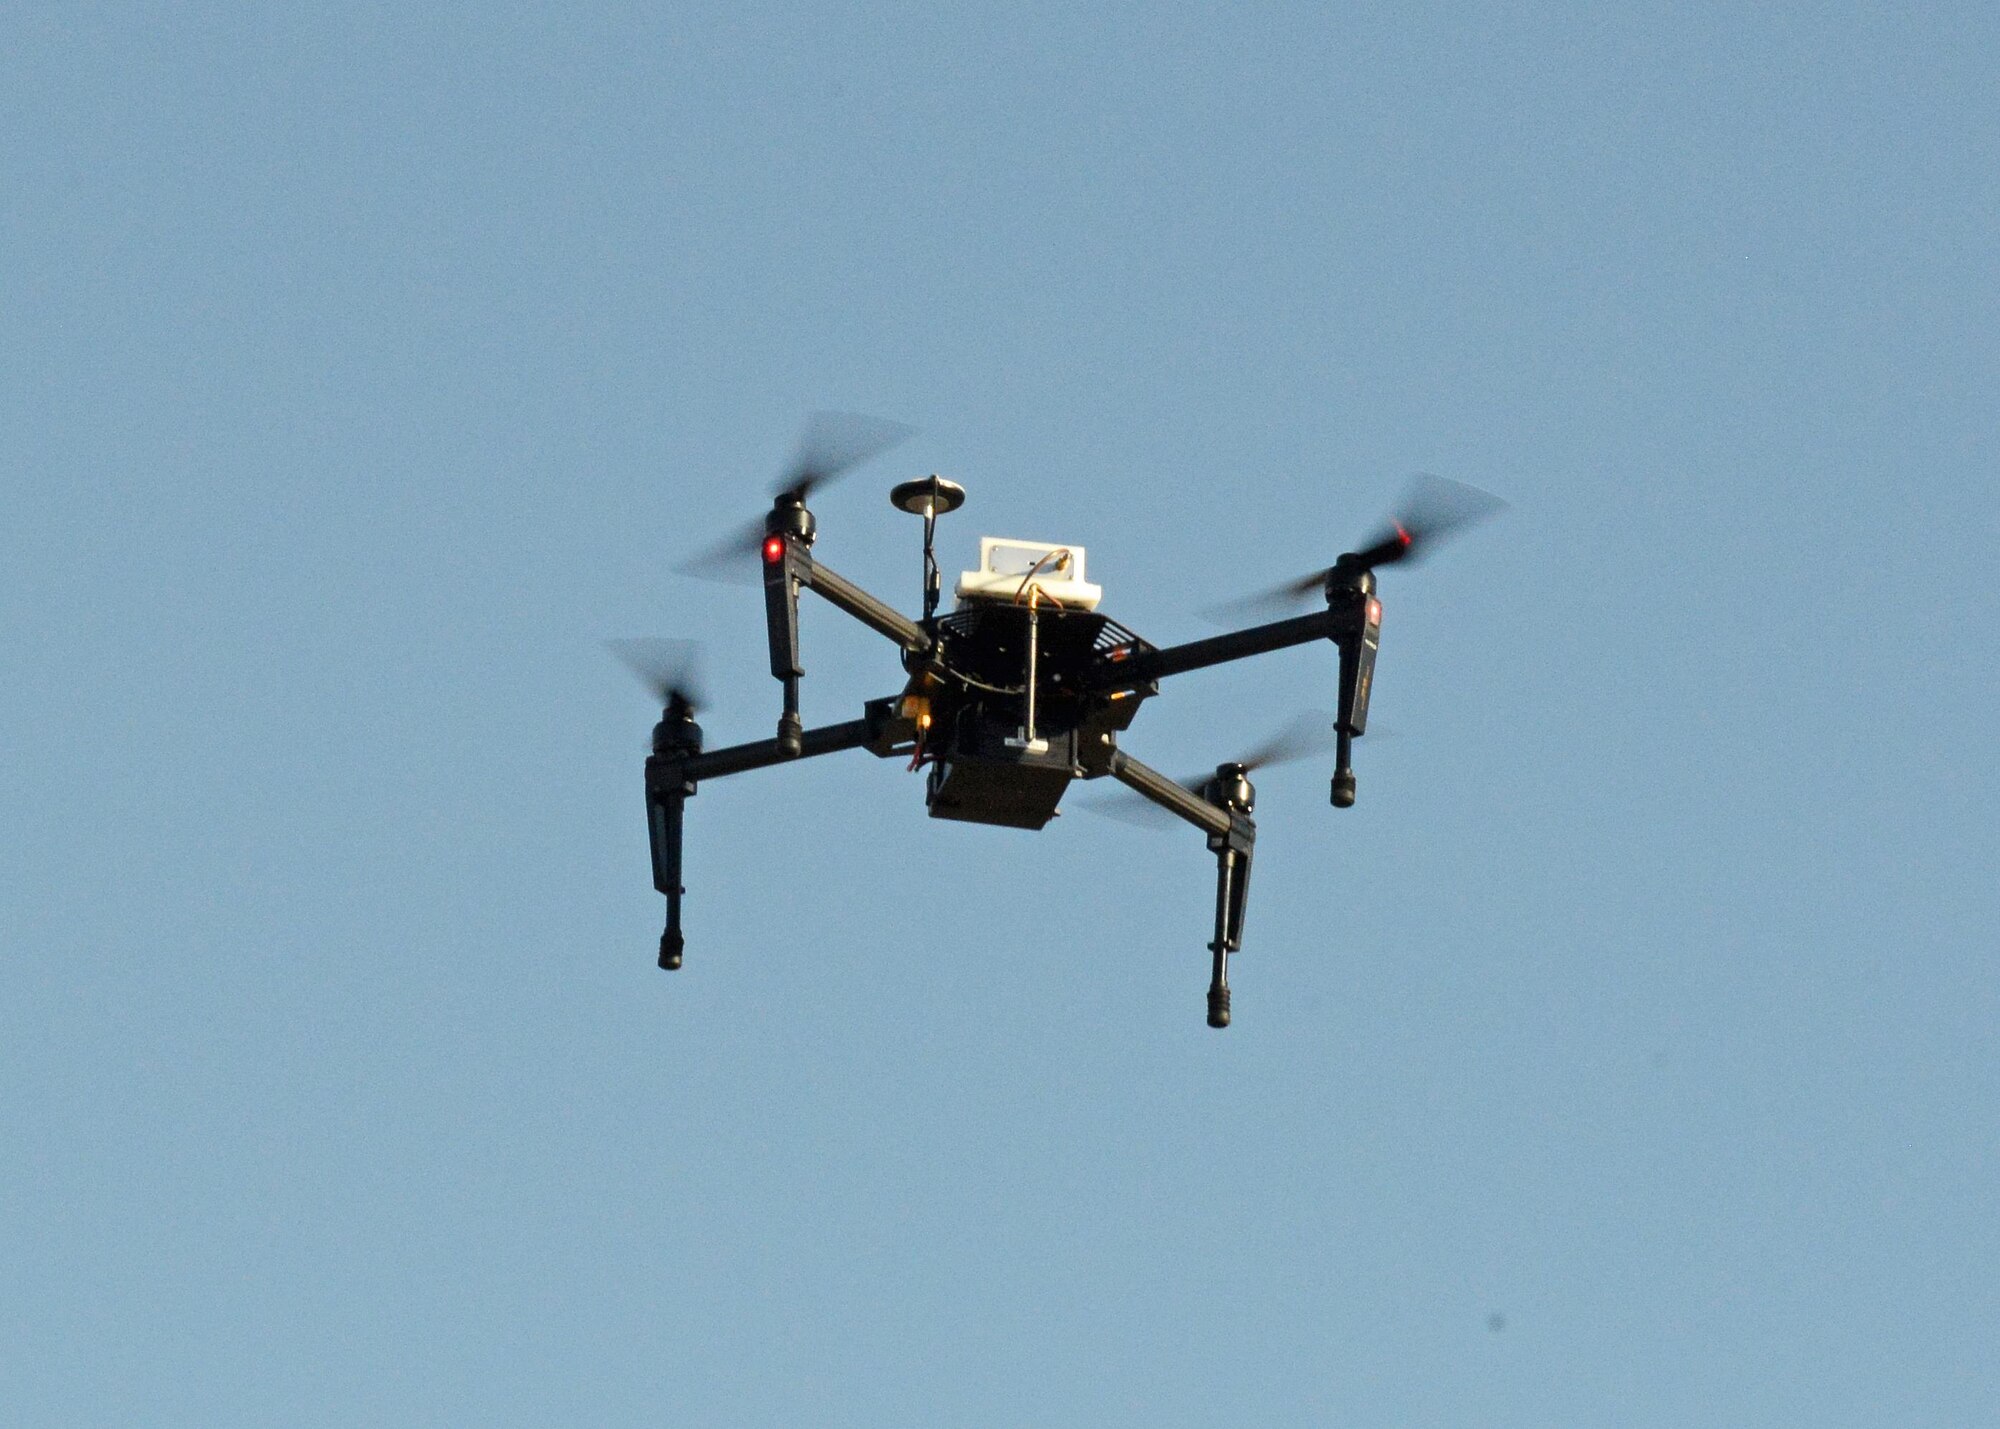 The quadcopter used in the test had GPS stabilization, which makes it “quite easy to pilot.” The aircraft can hover in a fixed position according to applied GPS coordinates. An antenna and transmitter were mounted on the aircraft, which was tested to see if it can be used as a flying radio frequency boresight to calibrate telemetry antennas. (U.S. Air Force photo by Kenji Thuloweit)